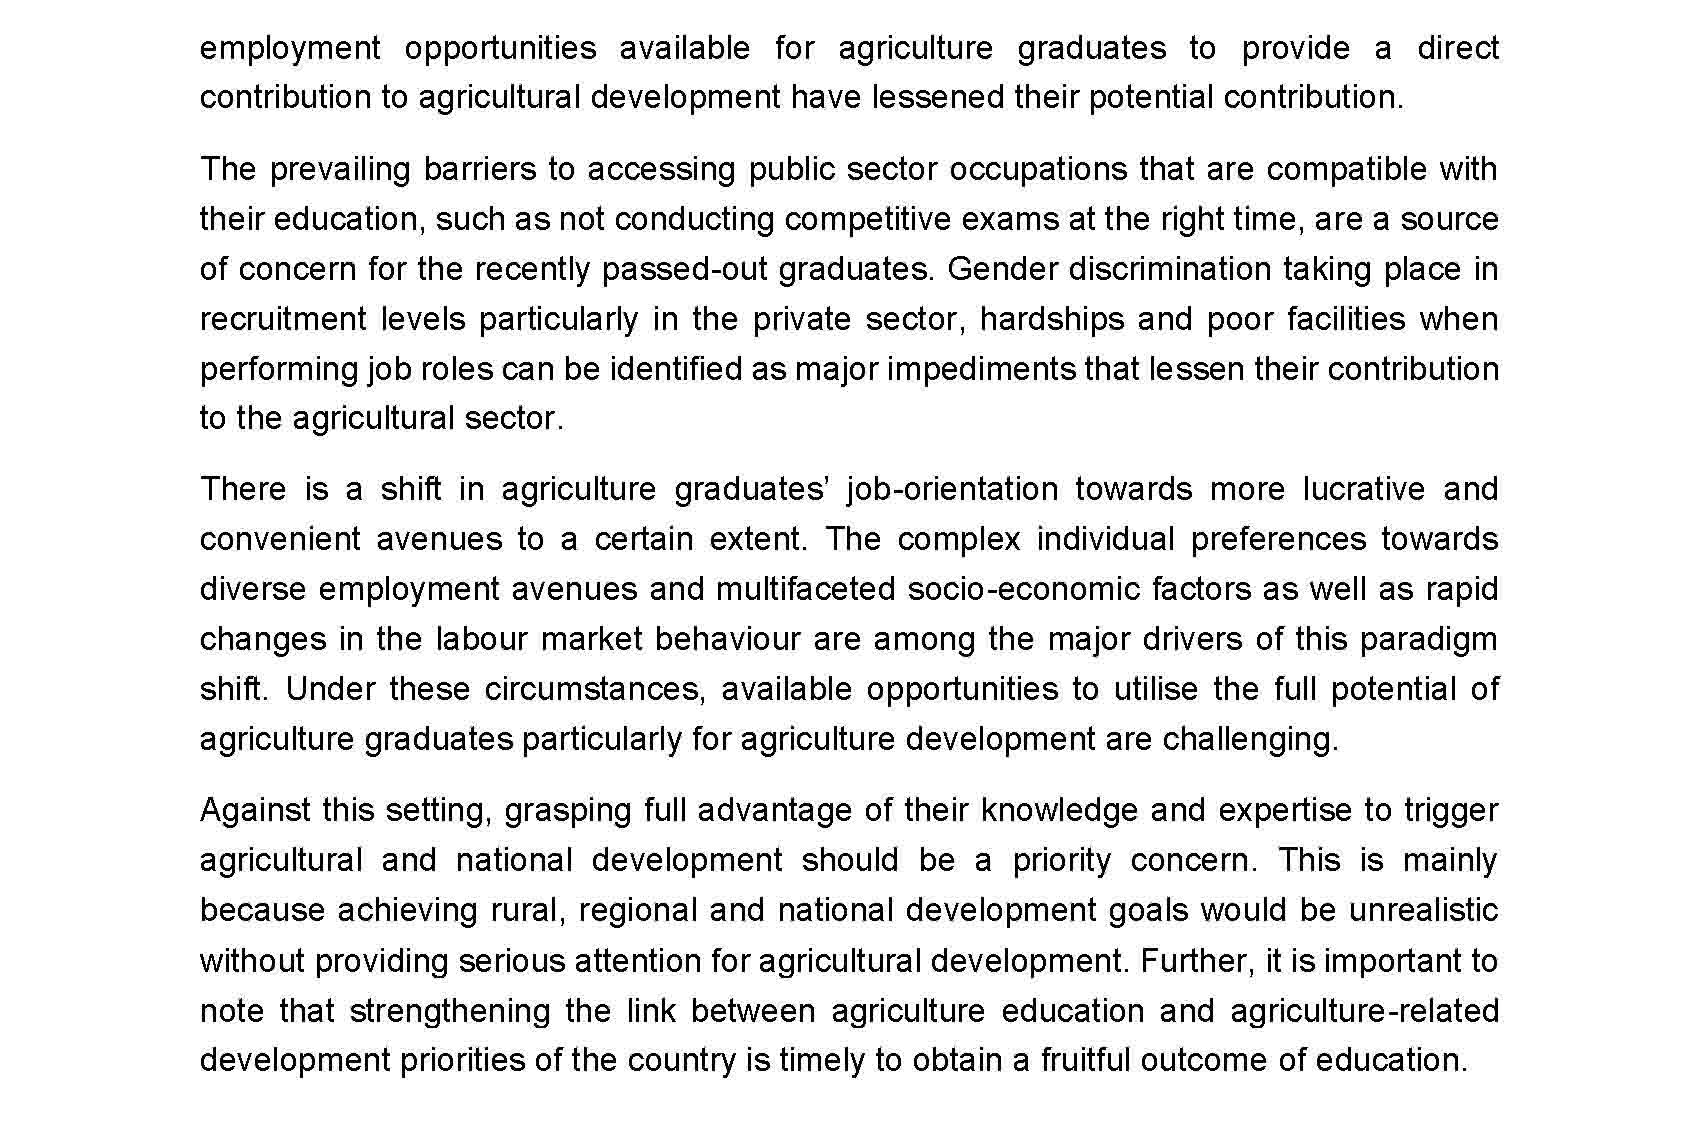 Motivating agriculture graduates with entrepreneurship opportunities Page 4